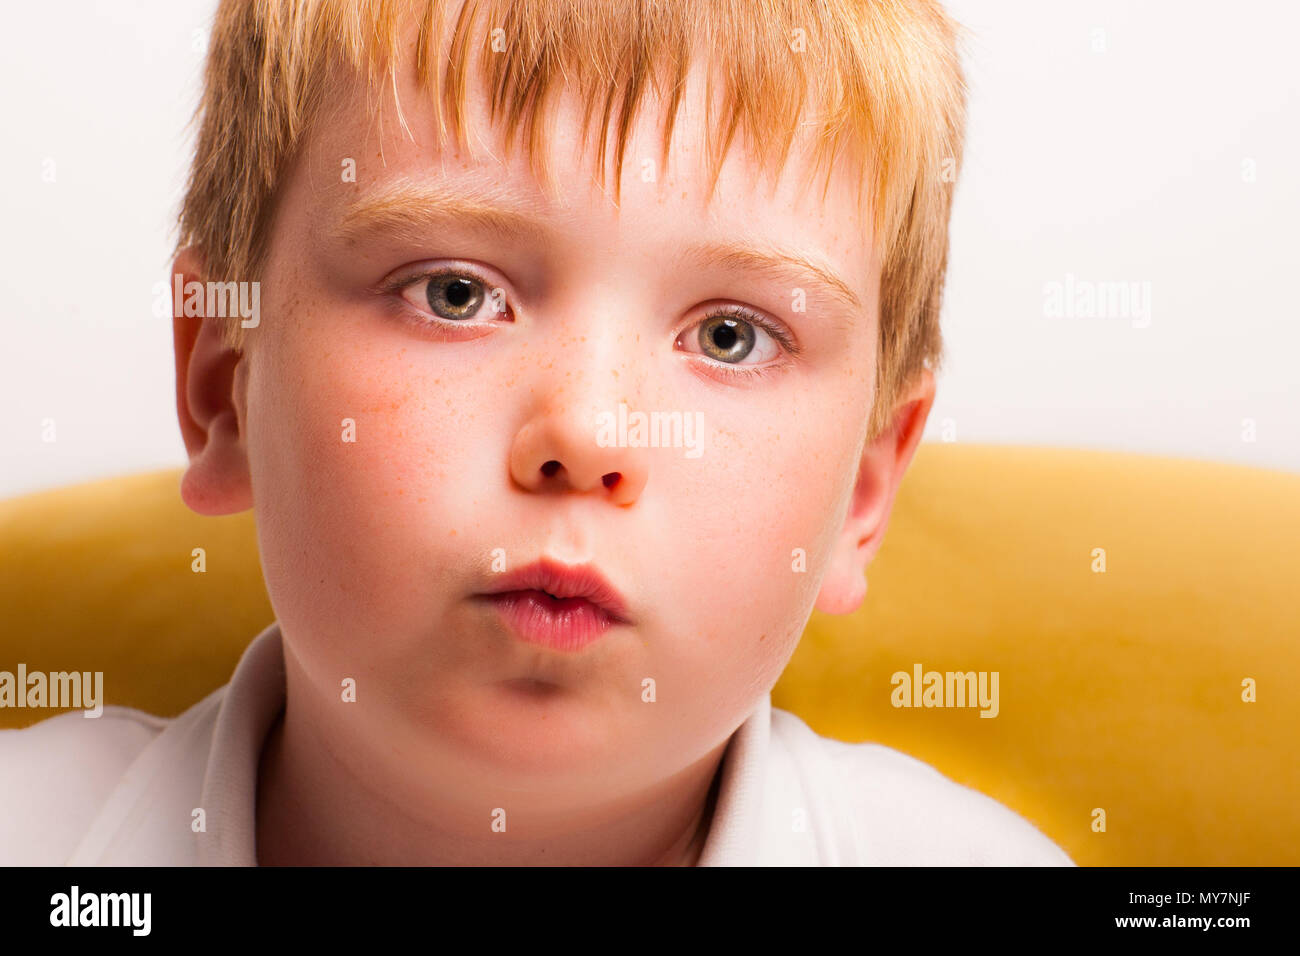 Little boy looking at camera Stock Photo